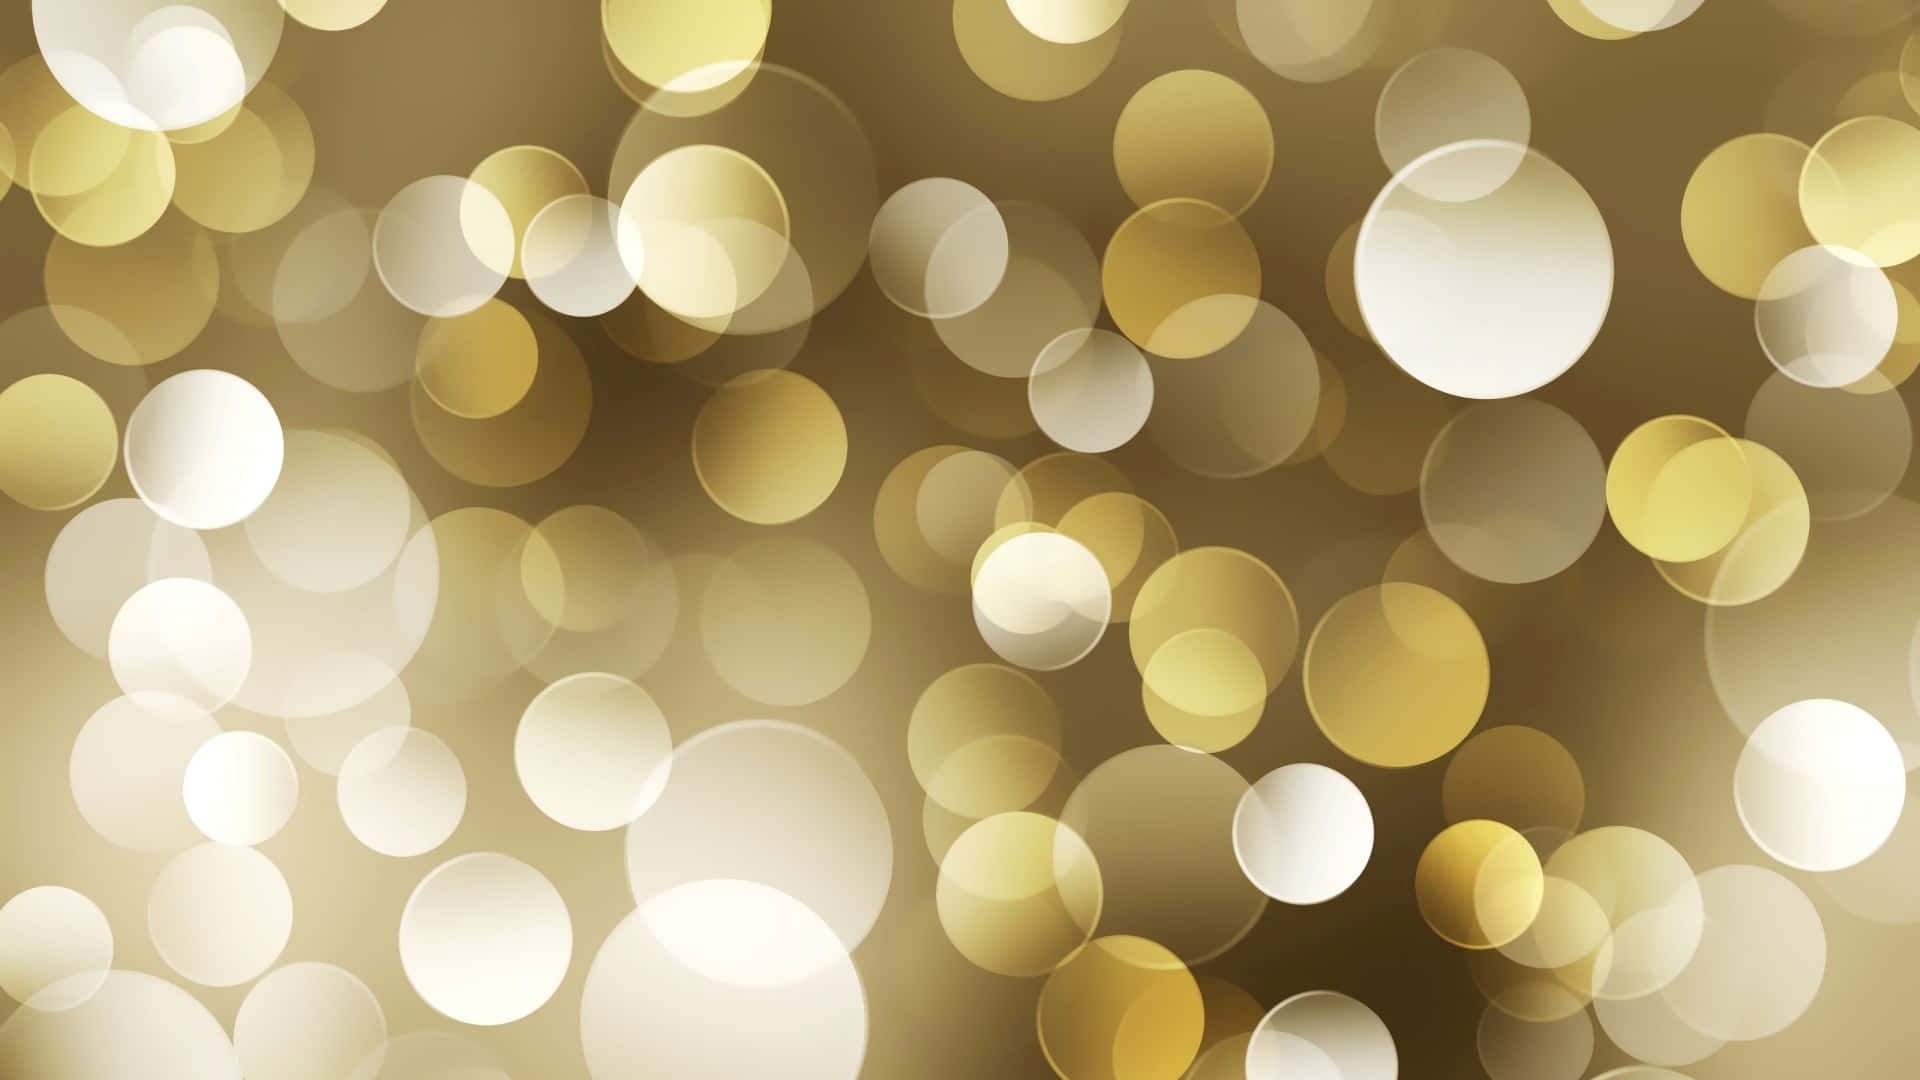 Shine bright with this stunning high resolution gold background.